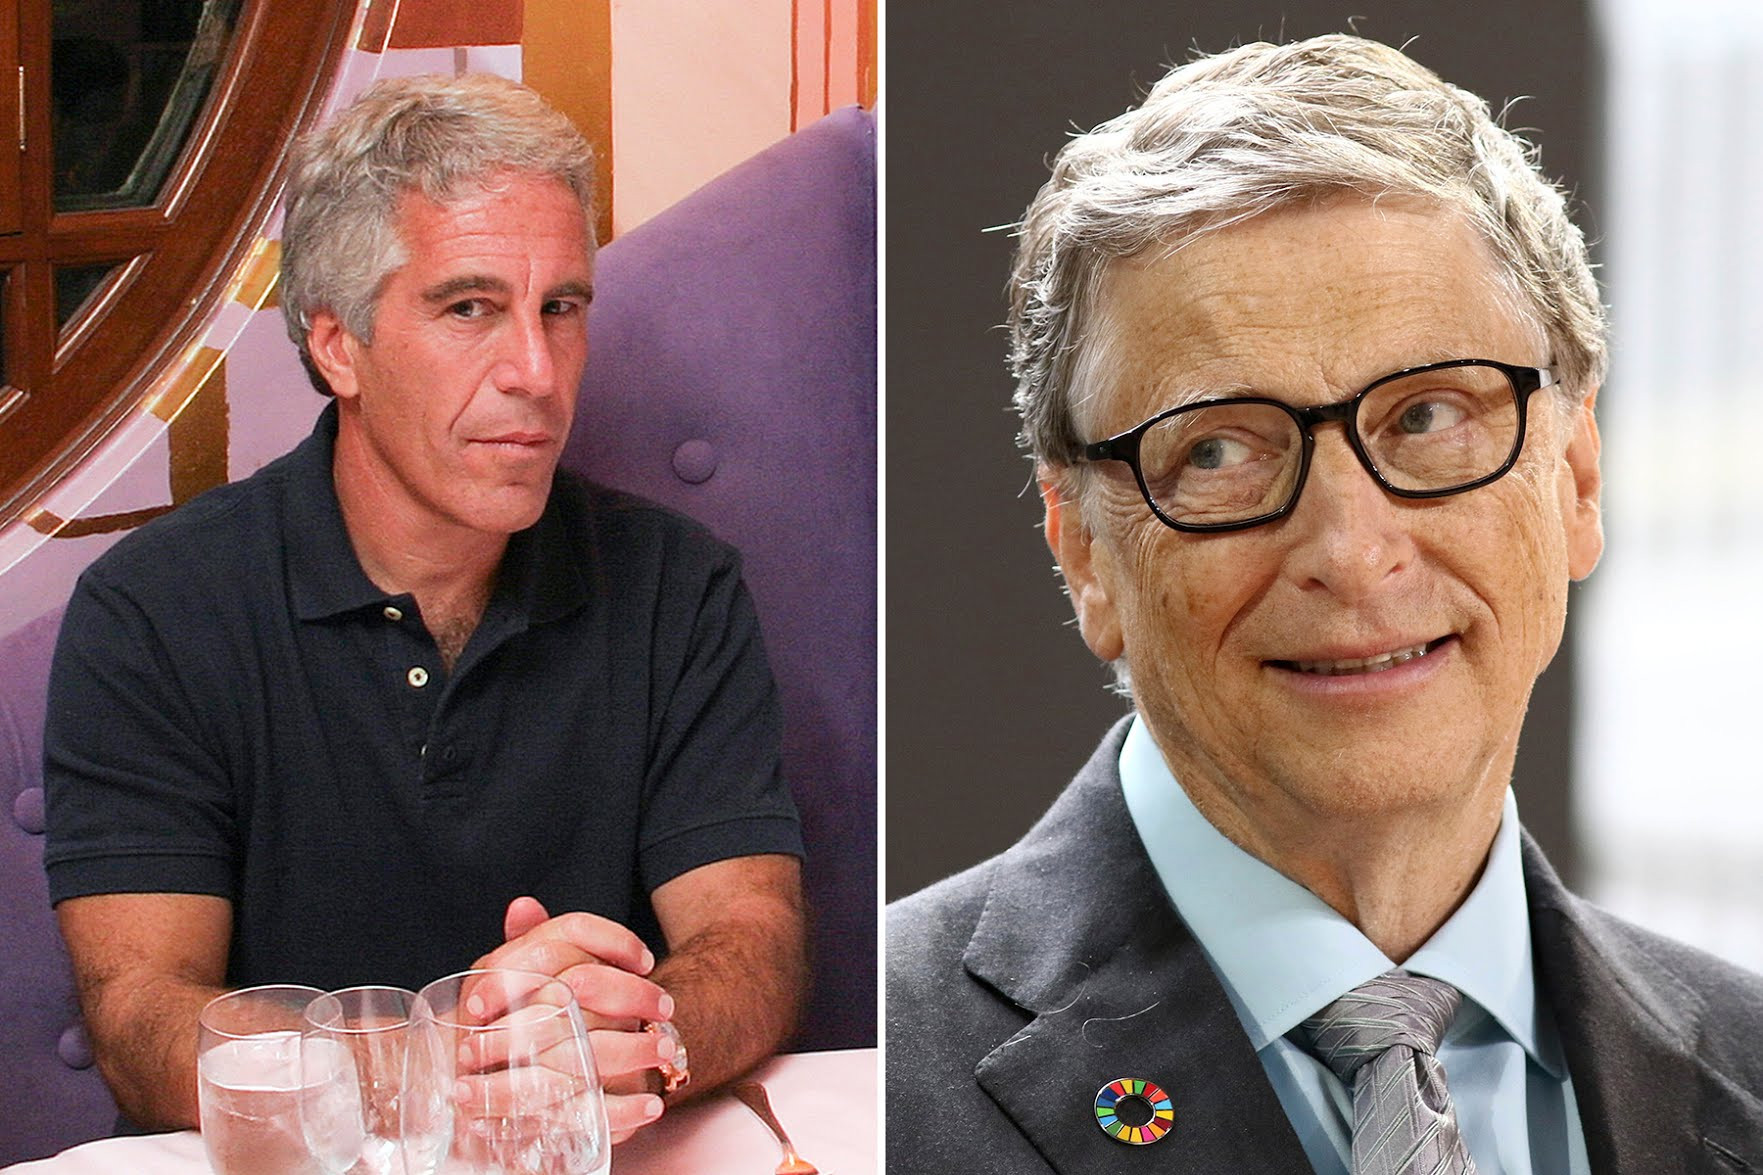 Bill Gates admits meetings with Jeffrey Epstein were a ‘huge mistake’